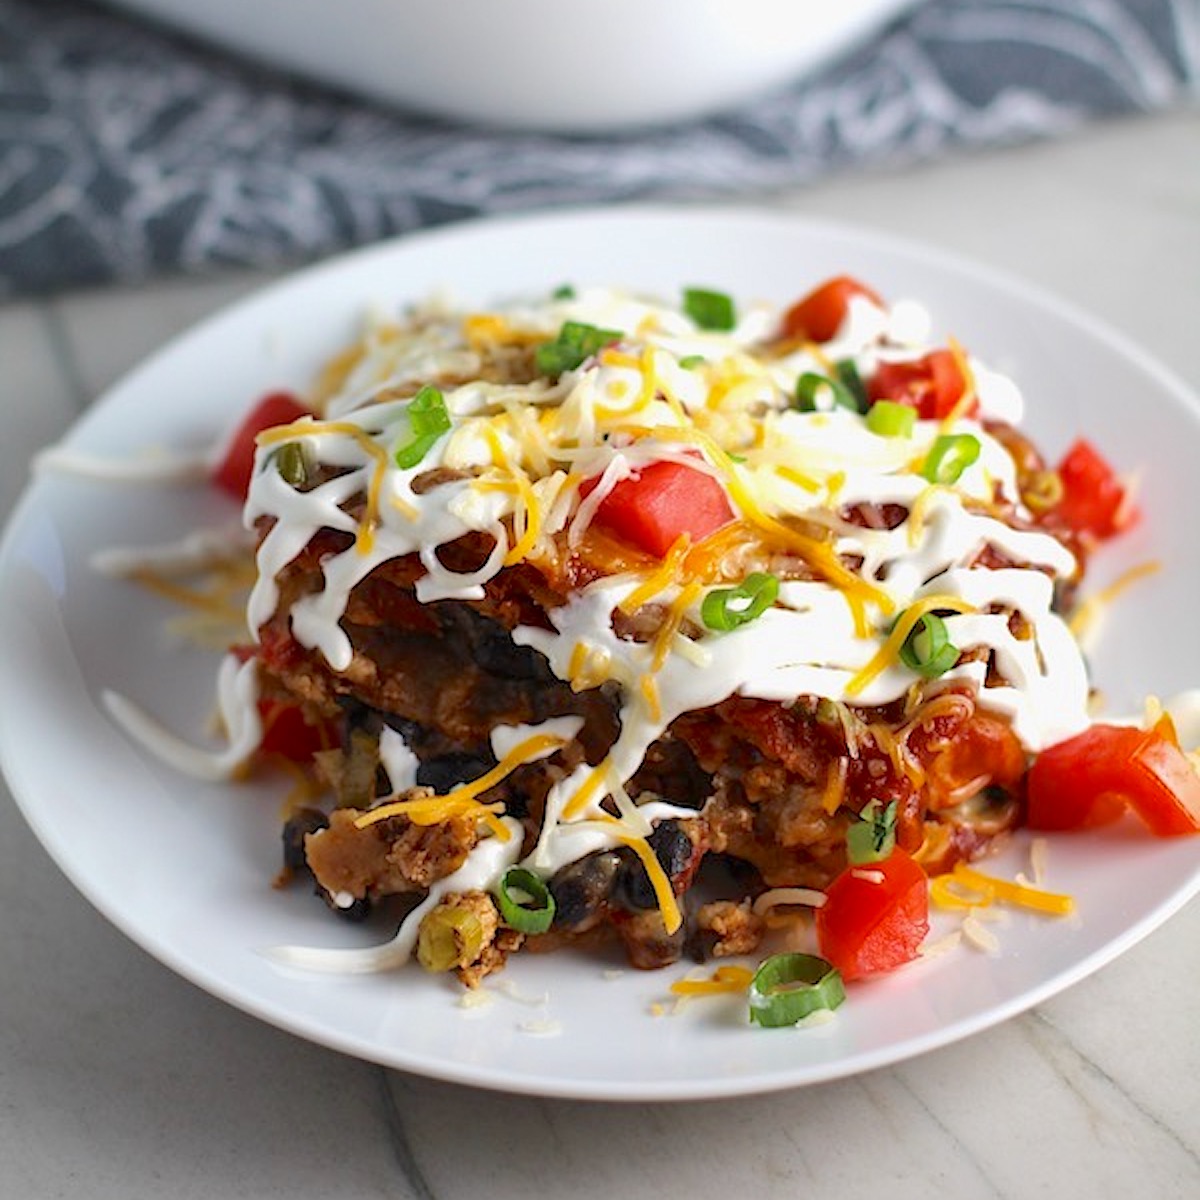 Piece of Ground Chicken taco casserole on plate with sour cream drizzled on top and diced tomatoes and scallion on top. What could be better than tacos? A Taco Casserole that's made with healthier lean ground chicken and can be made ahead for your busy schedule. This Taco Casserole has corn tortillas layered with browned ground chicken seasoned with smokey mexican spices, black beans, tomatoes, and cheese, and then more cheese.